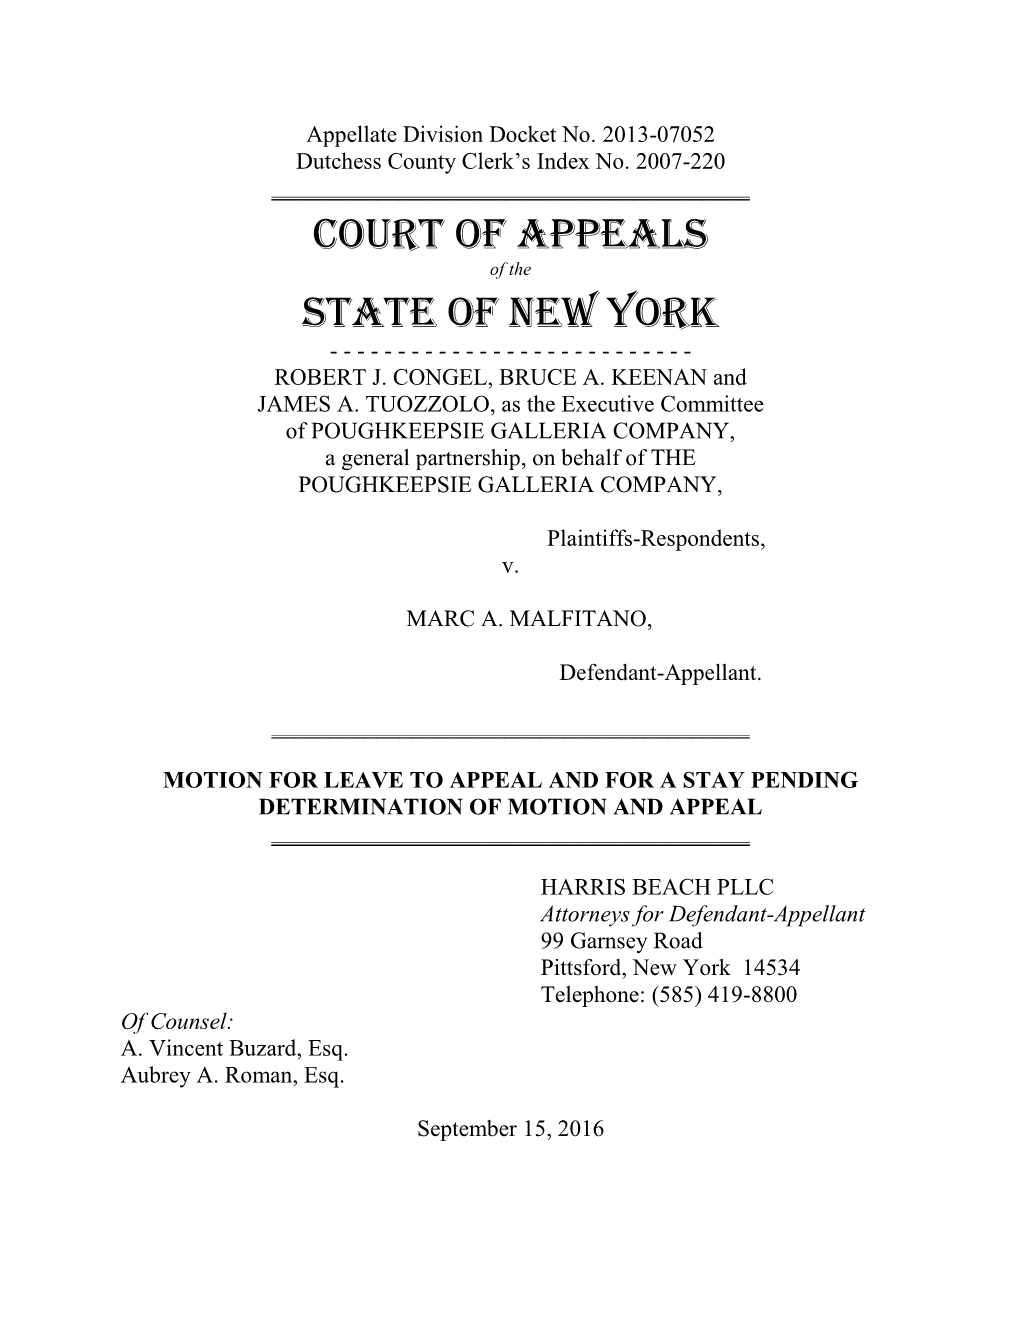 Here Is a Scarcity of Case Law Regarding This Statute That Addresses Partnership Dissolution